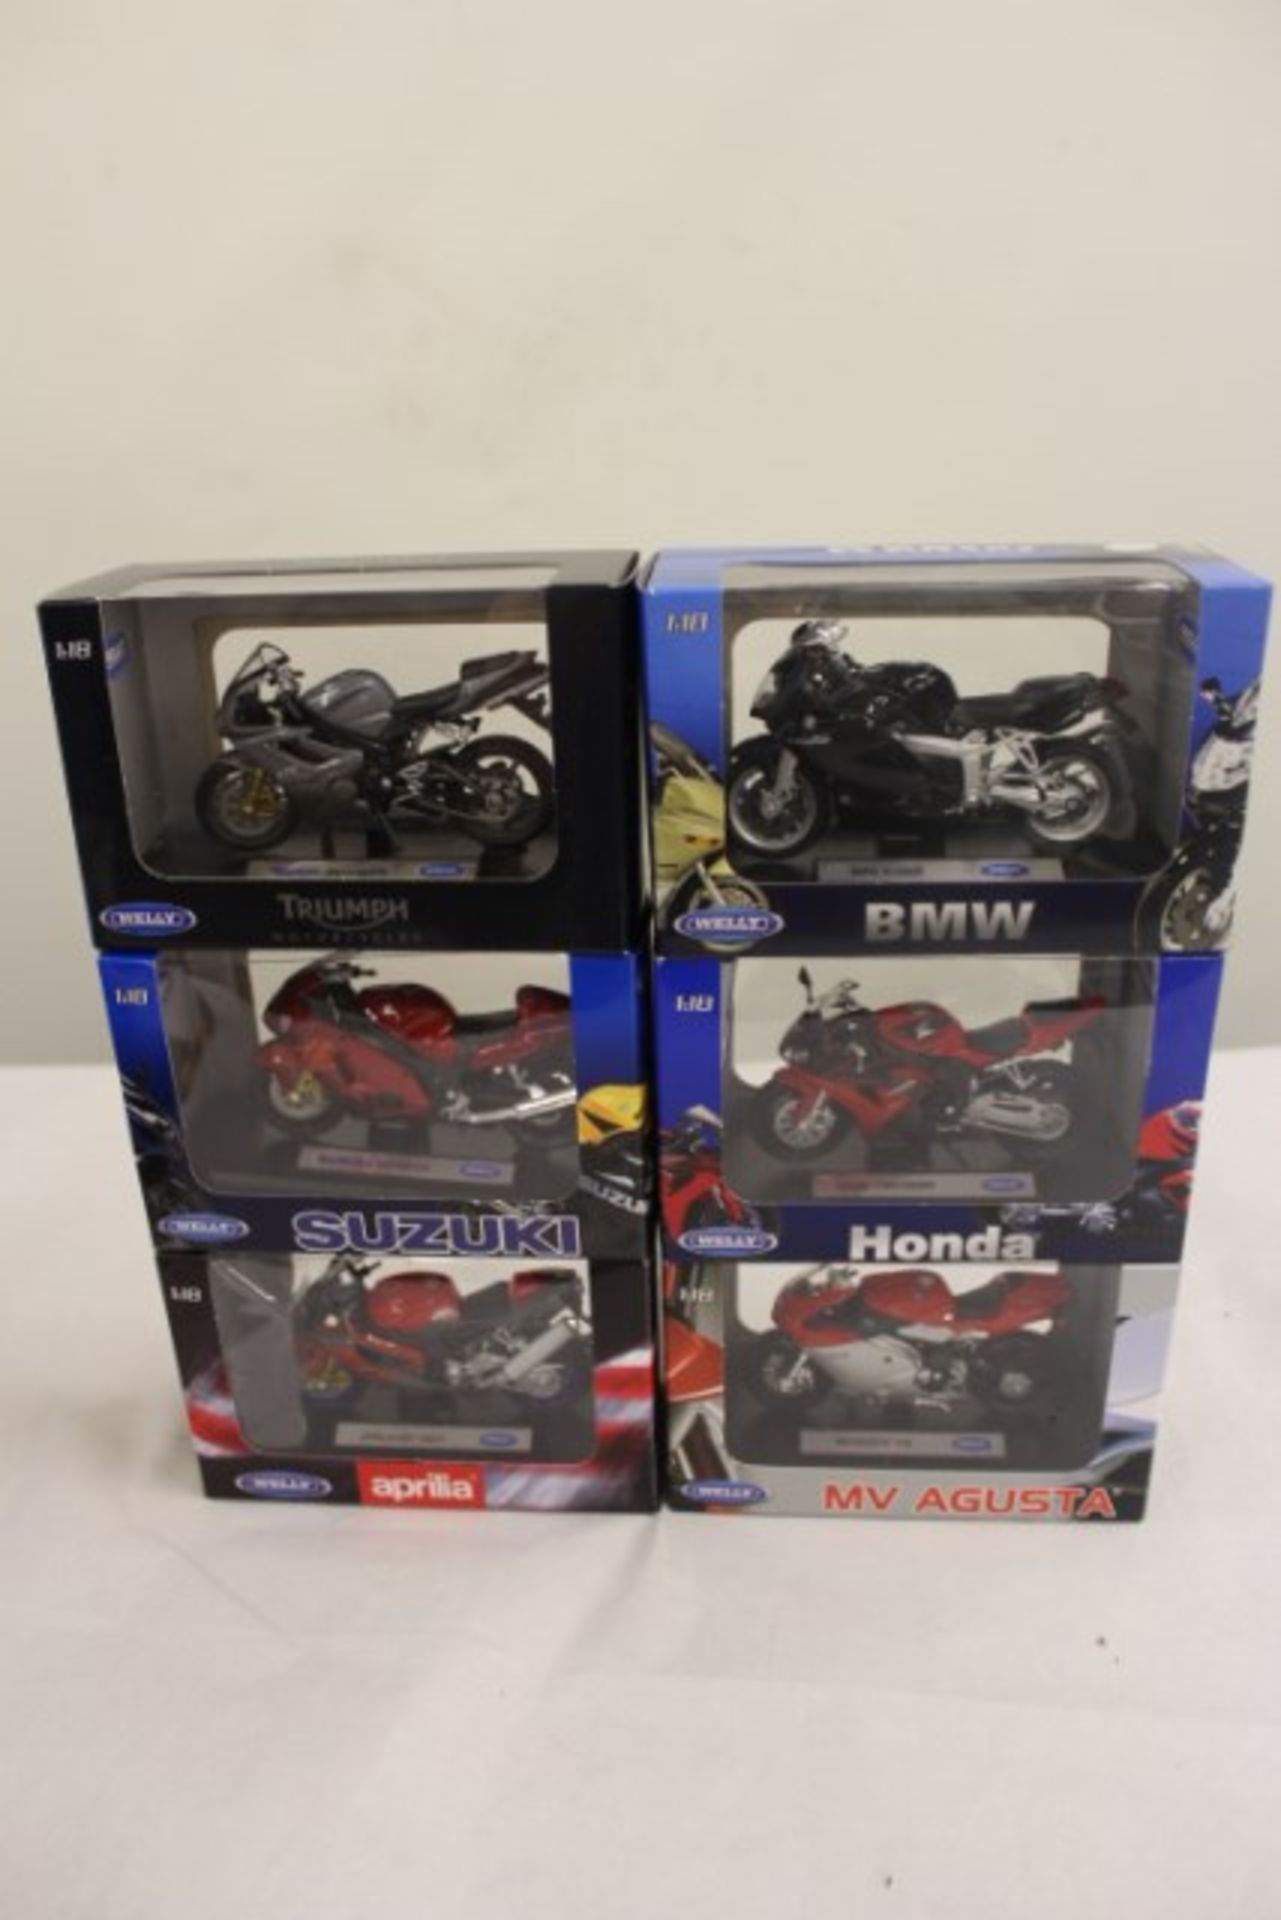 V Six 1:18 Scale Die Cast Model Motorcycles